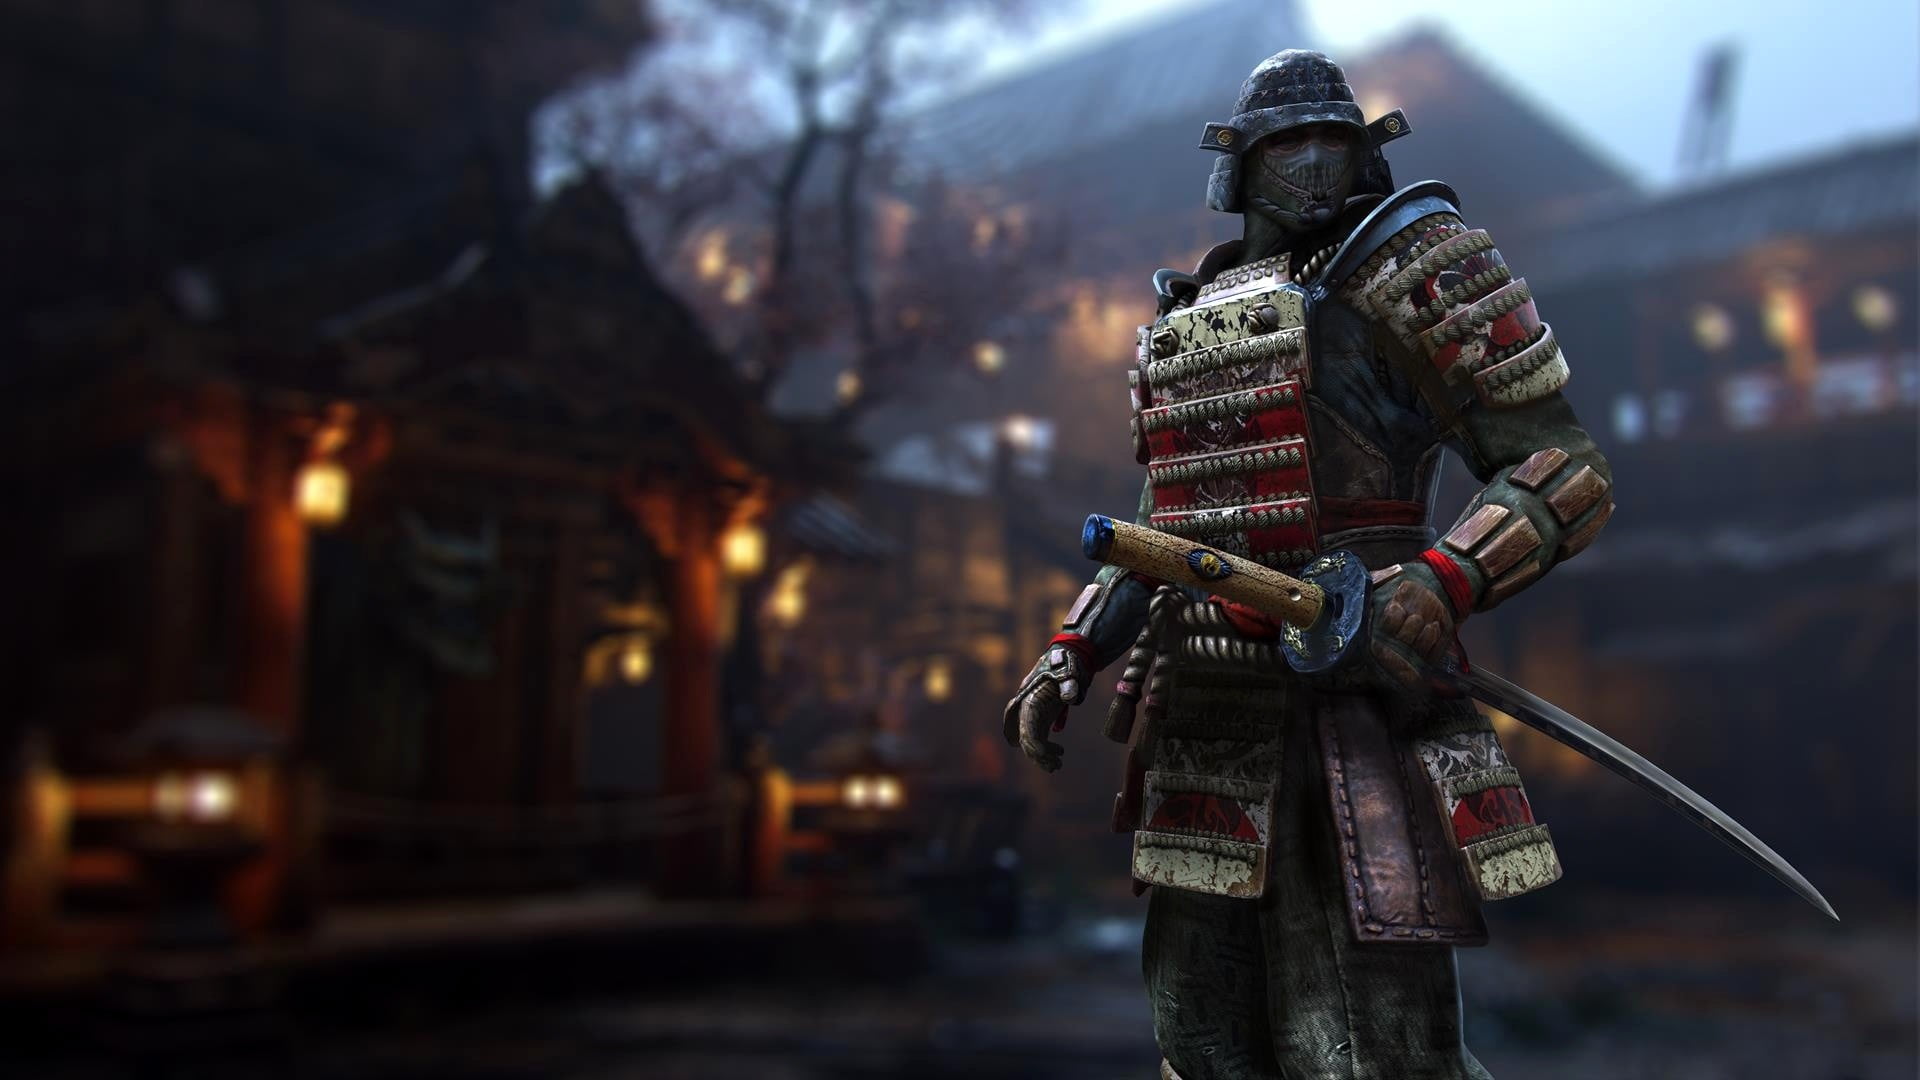 gray samurai, For Honor, sword, armor, focus on foreground, rear view